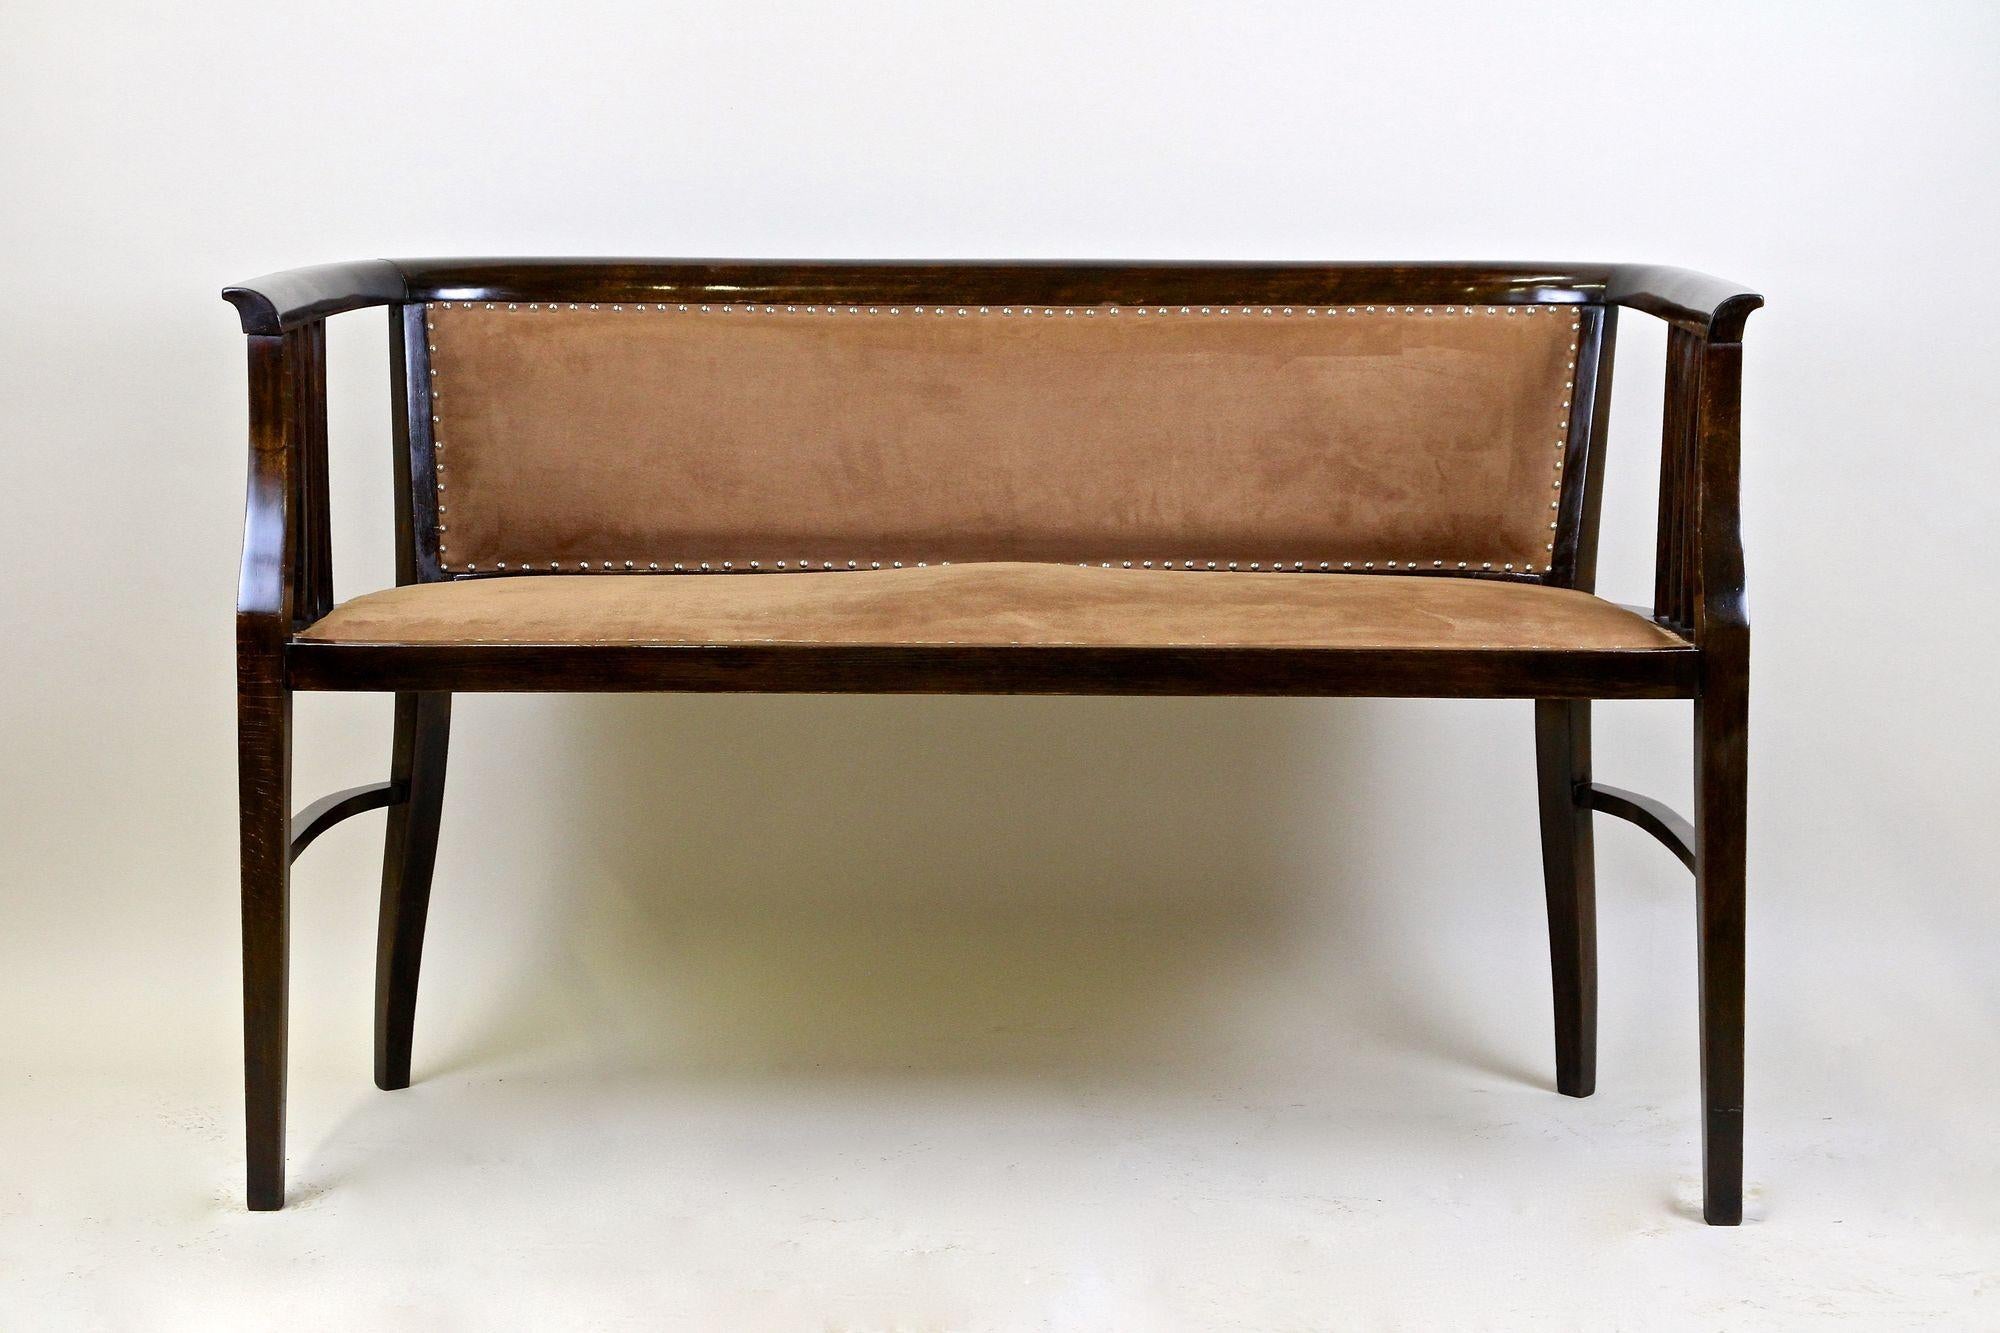 Great looking early 20th century Art Nouveau bentwood bench attributed to the renown company of Jacob & Josef Kohn in Vienna/Austria. The incredible timeless design impresses with fantastic shaped lines. Artfully made around 1910 this bentwood bench